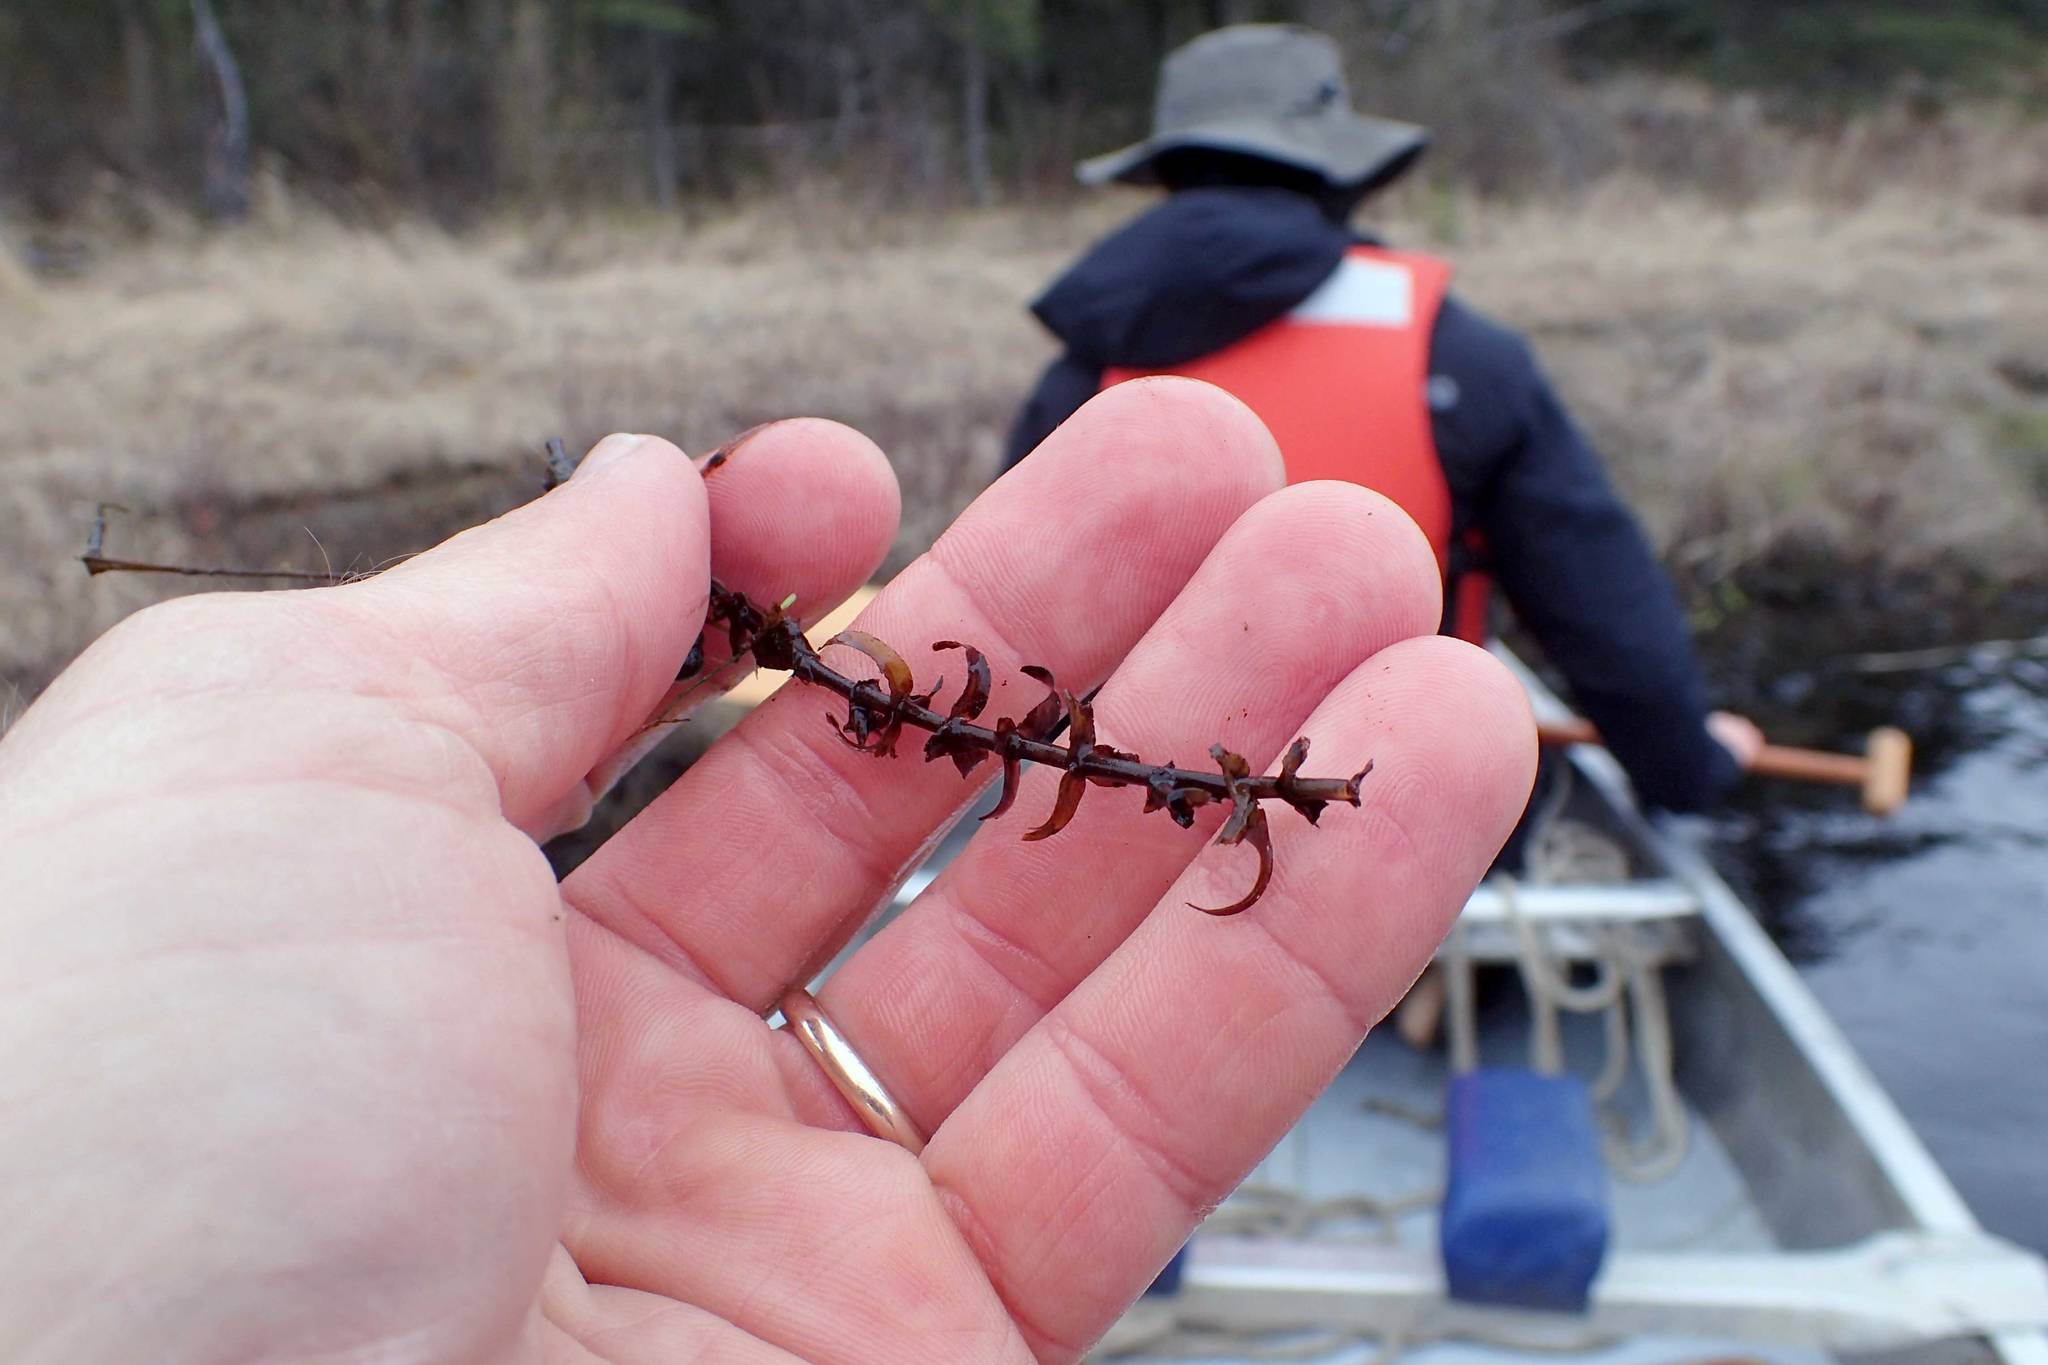 The last strand of elodea on the Kenai Peninsula was found during a survey in May 2019. This fragment is brown and brittle, signs of dying from having been treated with herbicide since 2017. (Photo by Matt Bowser/Kenai National Wildlife Refuge).